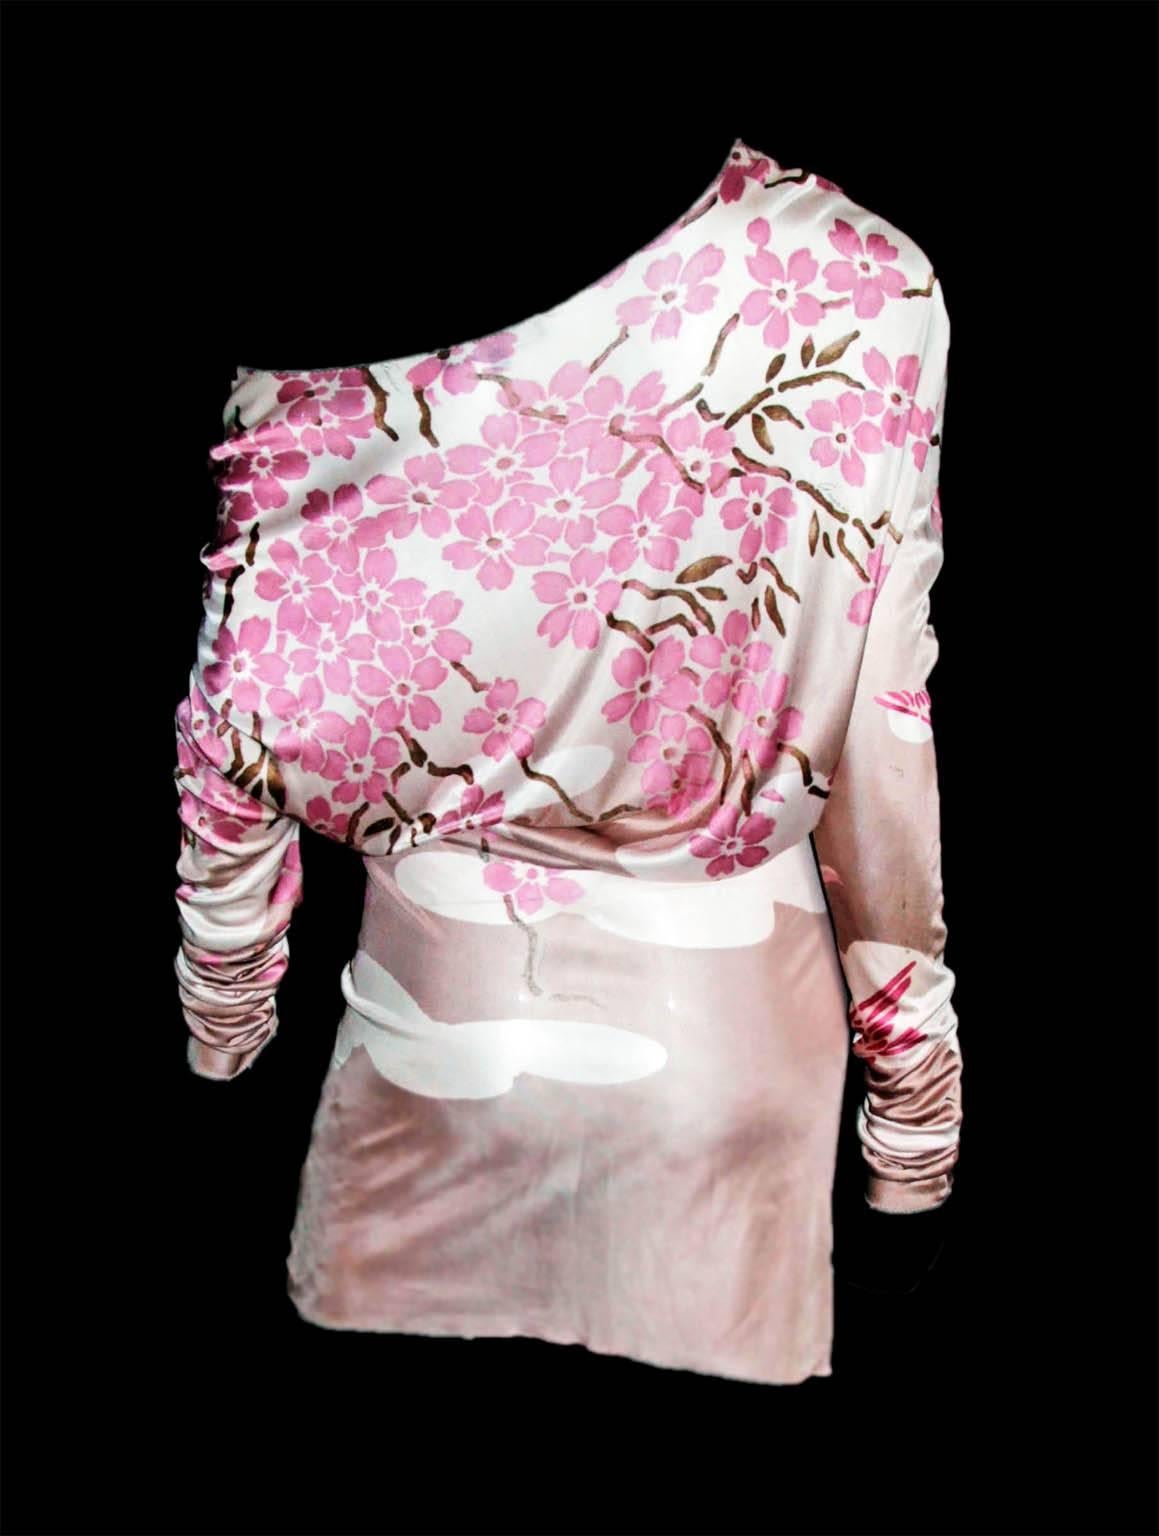 That Rare & Incredible Jersey Chinoiserie Runway Dress From Tom Ford's Spring Summer 2003 Collection For Gucci!

That heavenly Chinoiserie dress from Tom Ford's gorgeous Spring/Summer 2003 Collection for Gucci! Often dubbed one of the sexiest Tom